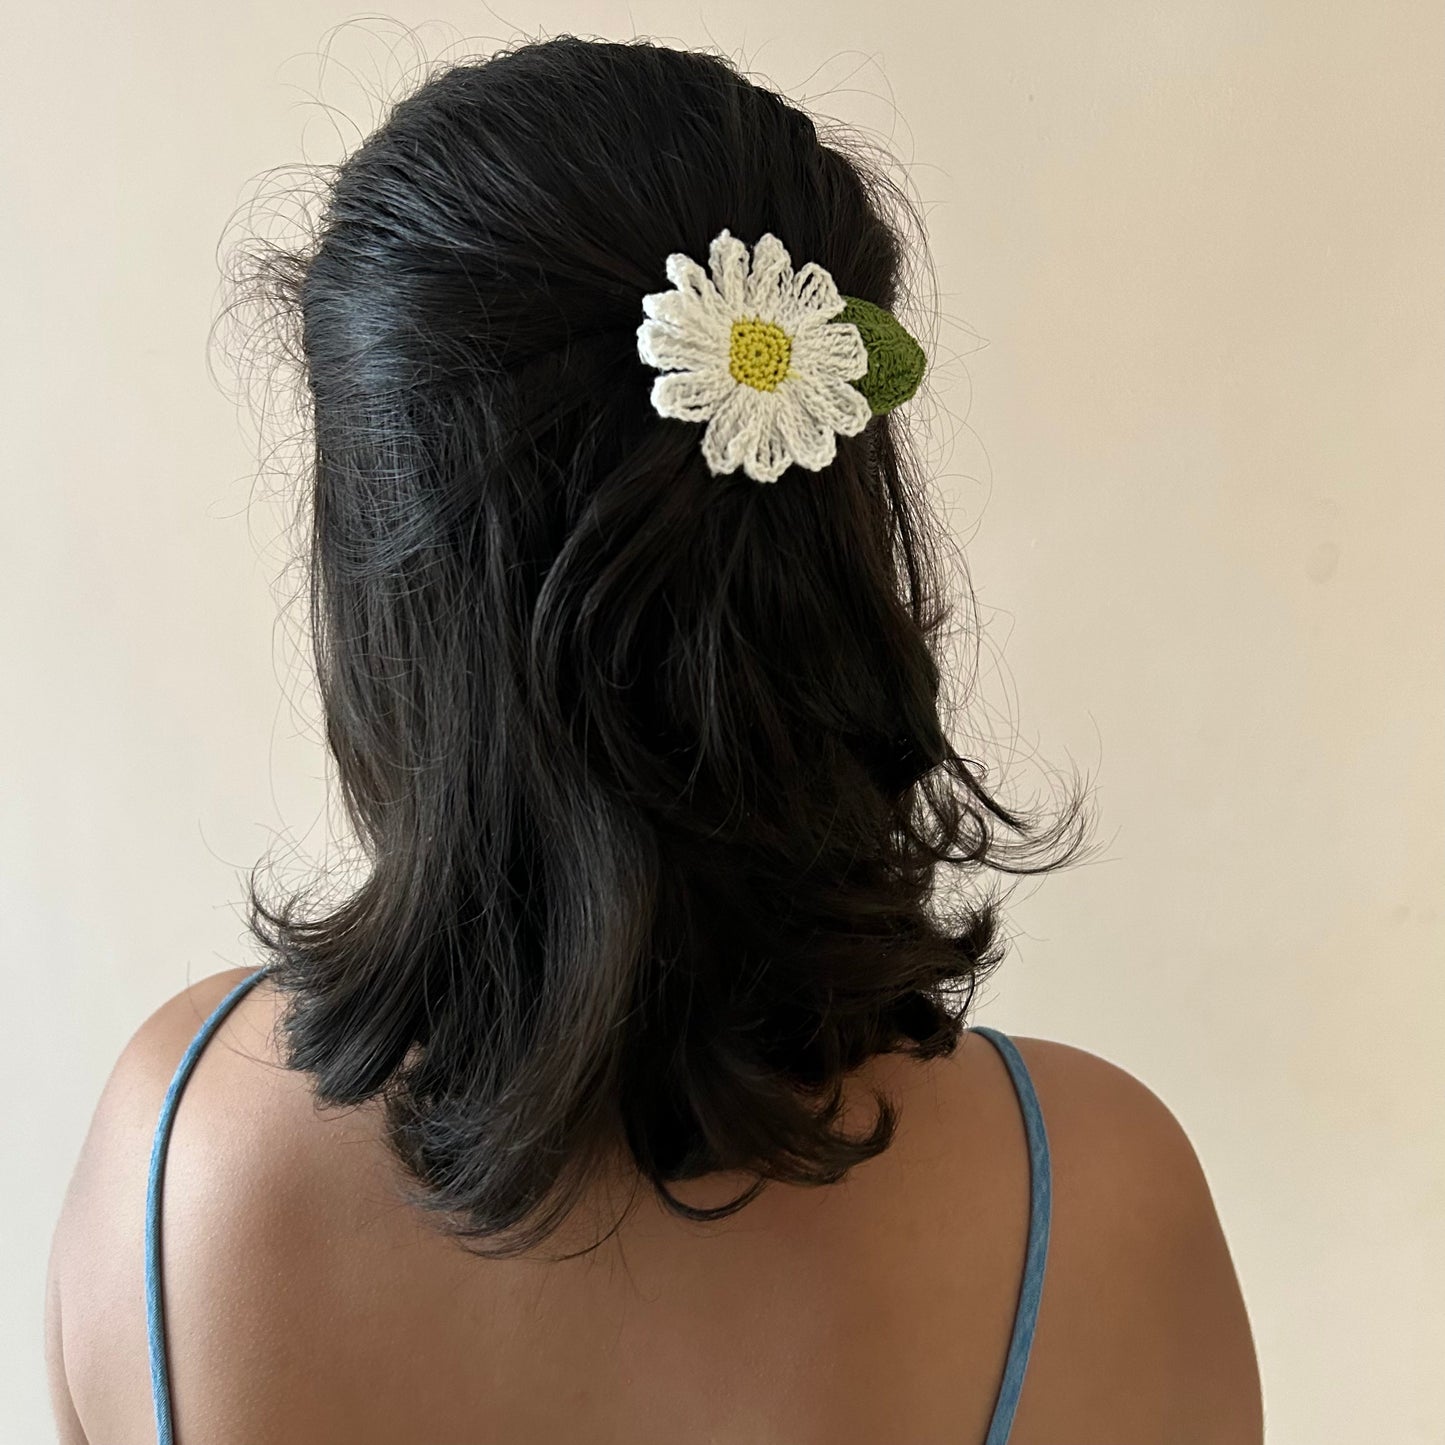 White Daisy Crochet Hair Clip at Kamakhyaa by Ikriit'm. This item is Accessories, Cotton yarn, Crochet, Free Size, Hair Accessories, Ikriit'm, Natural, White